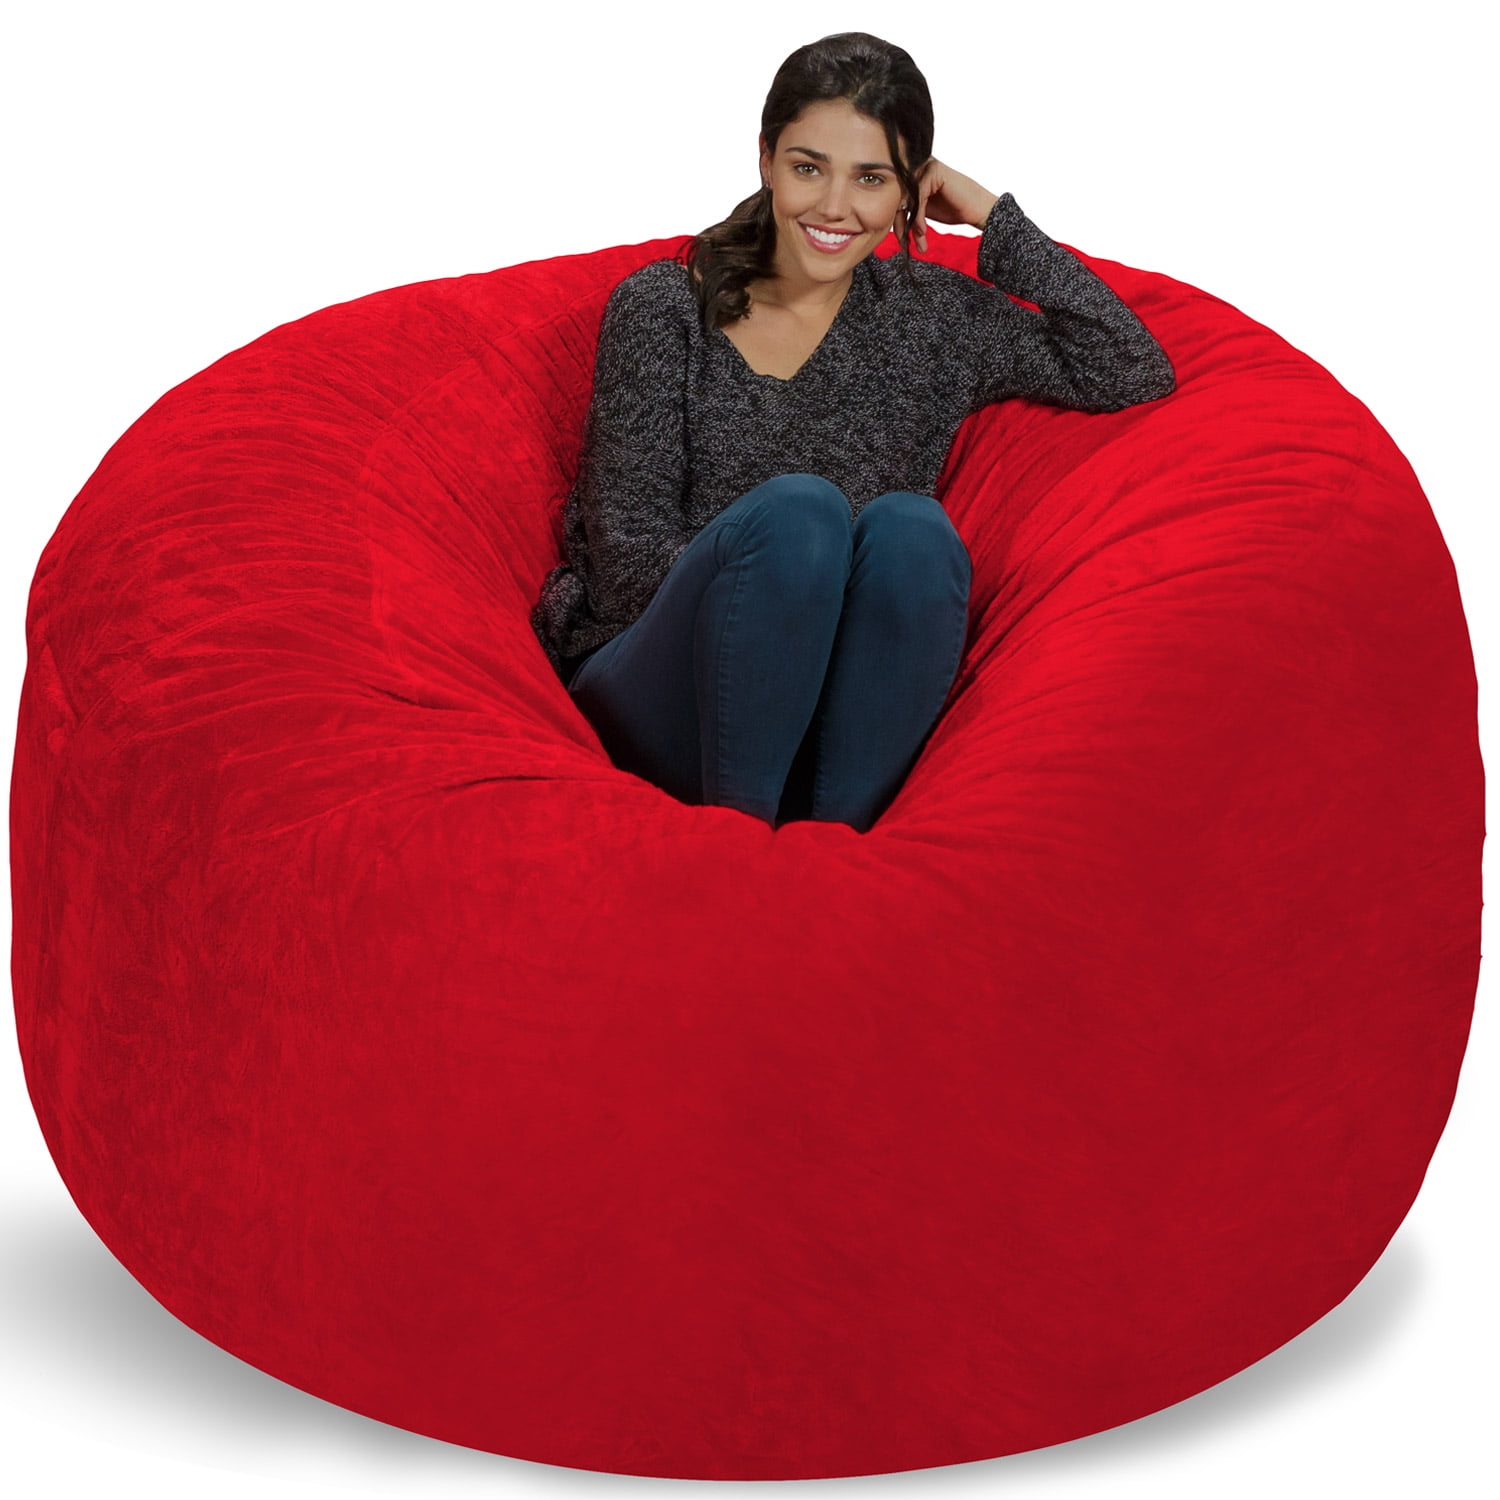 Buy Giant Bean Bag from Wholesale Suppliers –